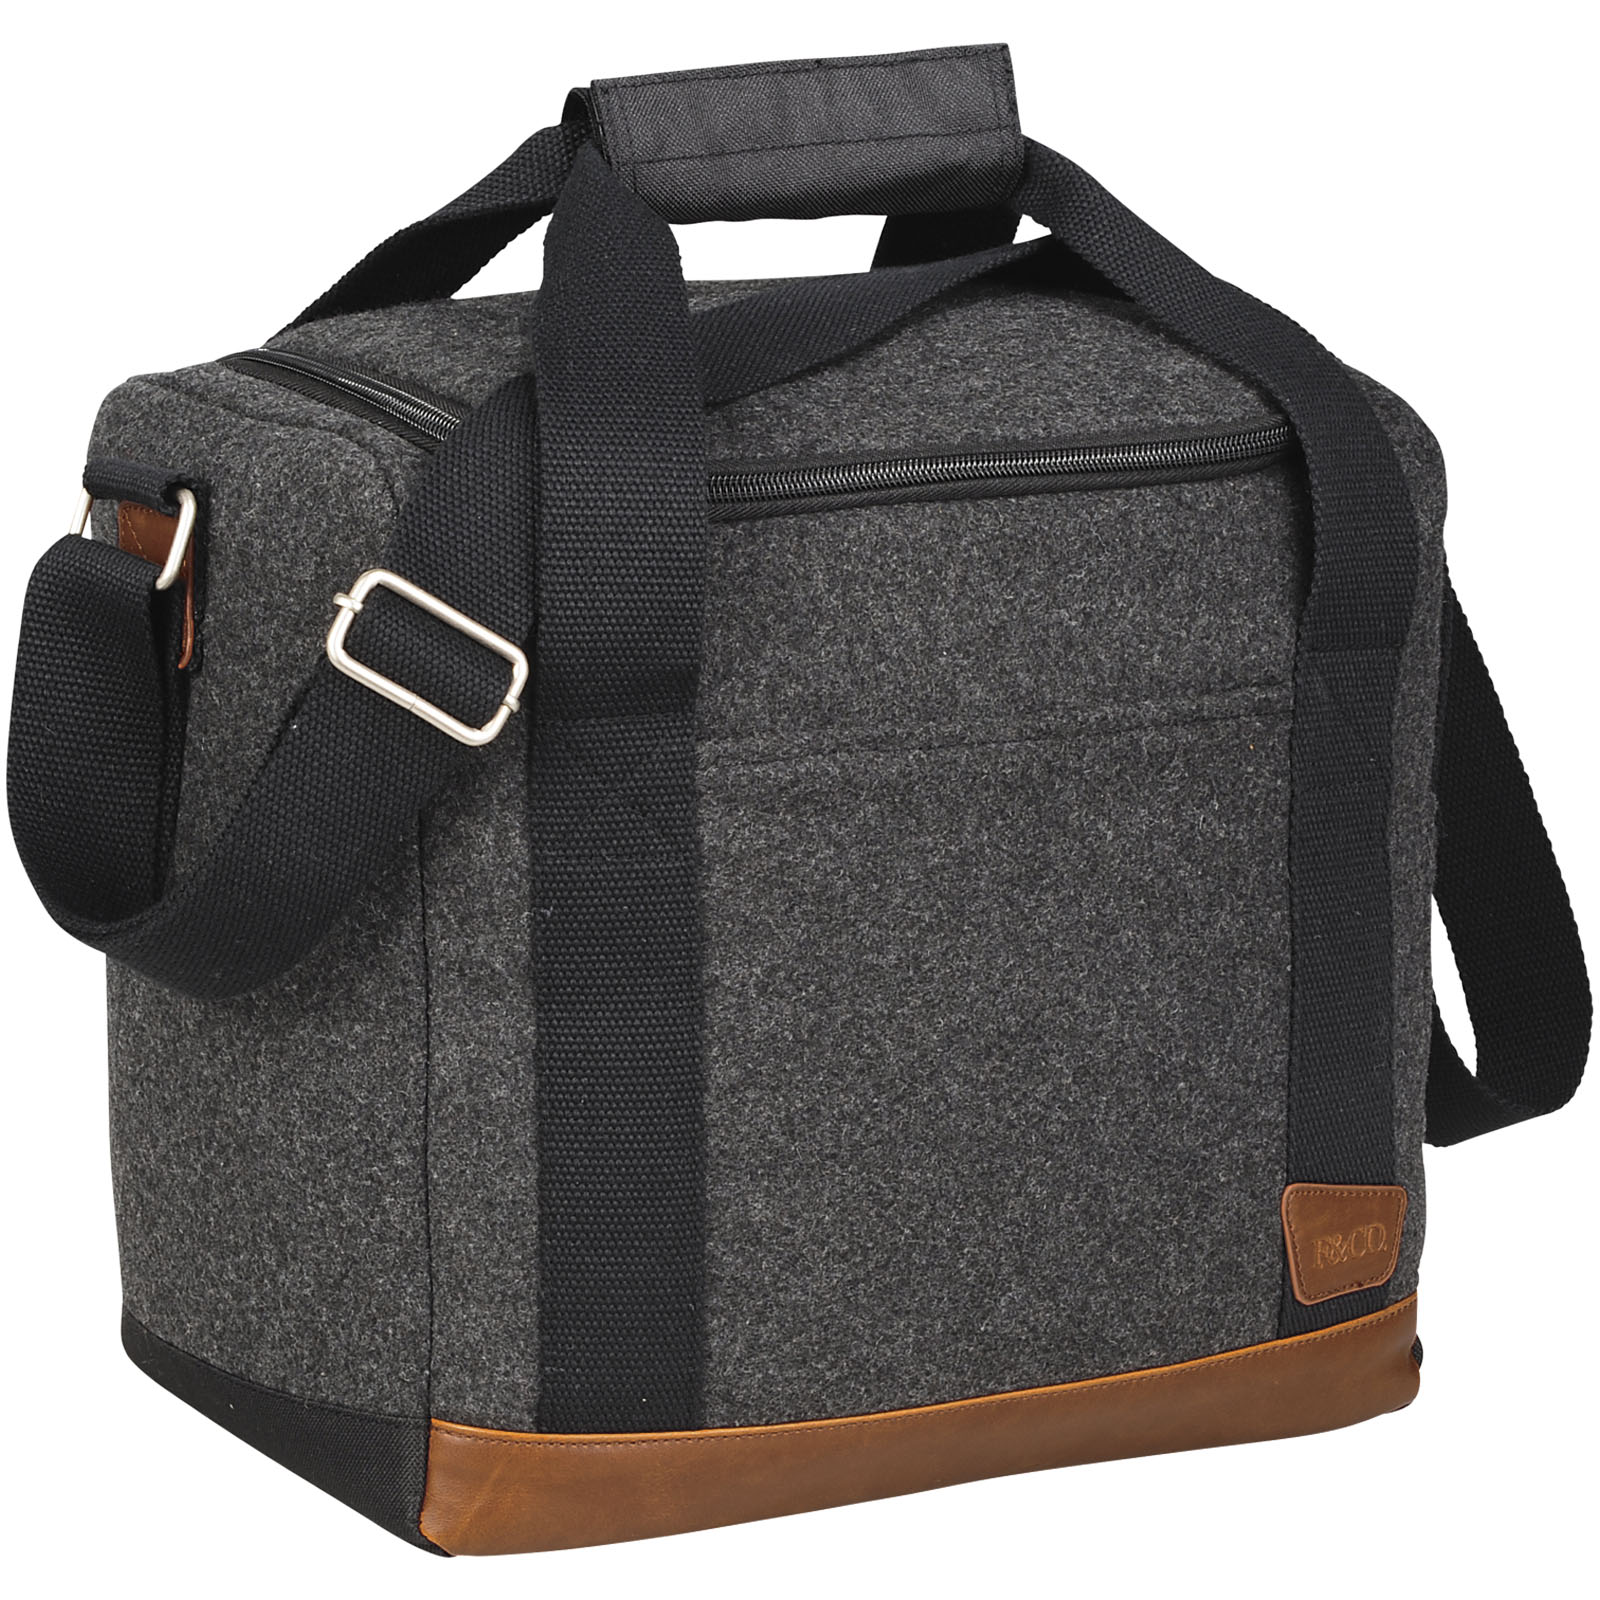 Insulated cooler bag from the Field & Co.® Campster Series, complete with a bottle divider - Nutfield